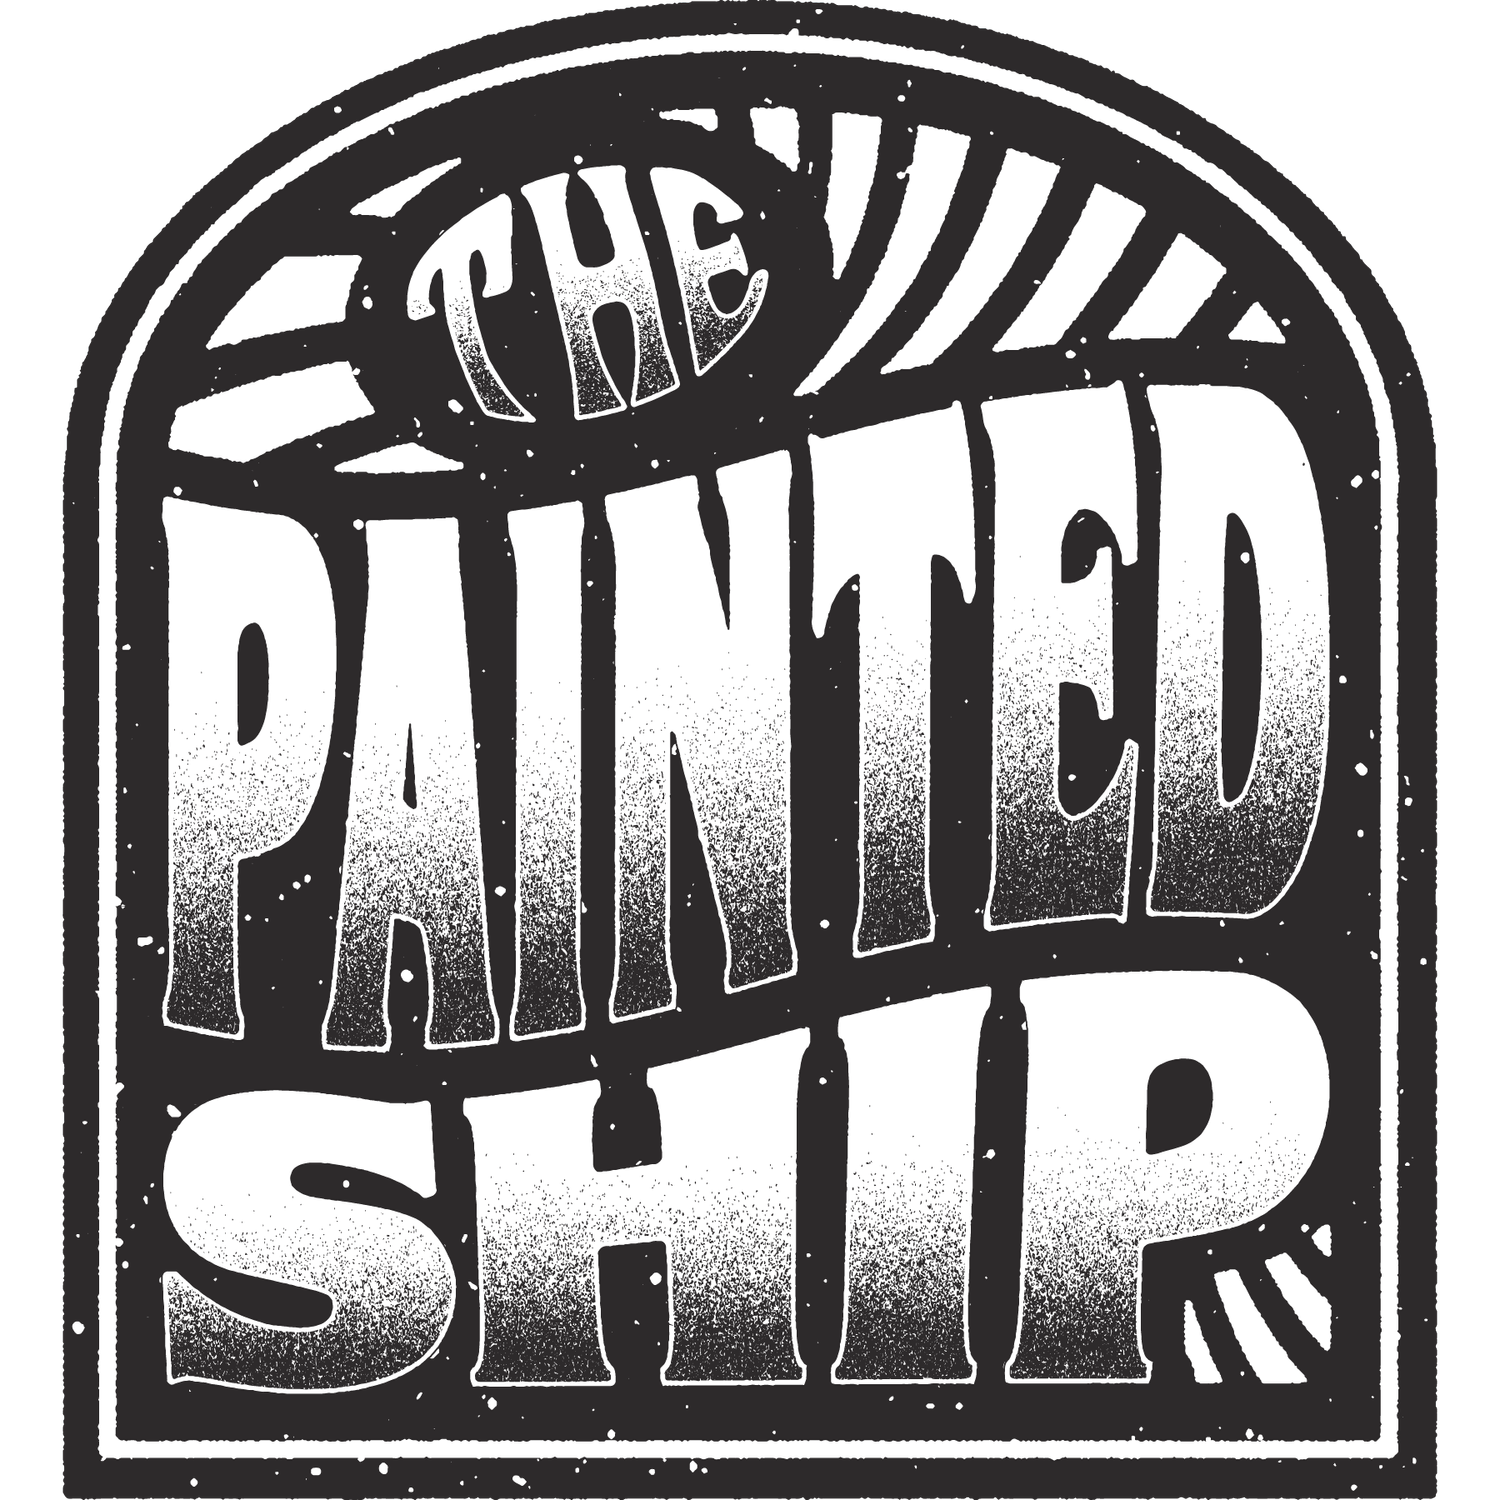 The Painted Ship